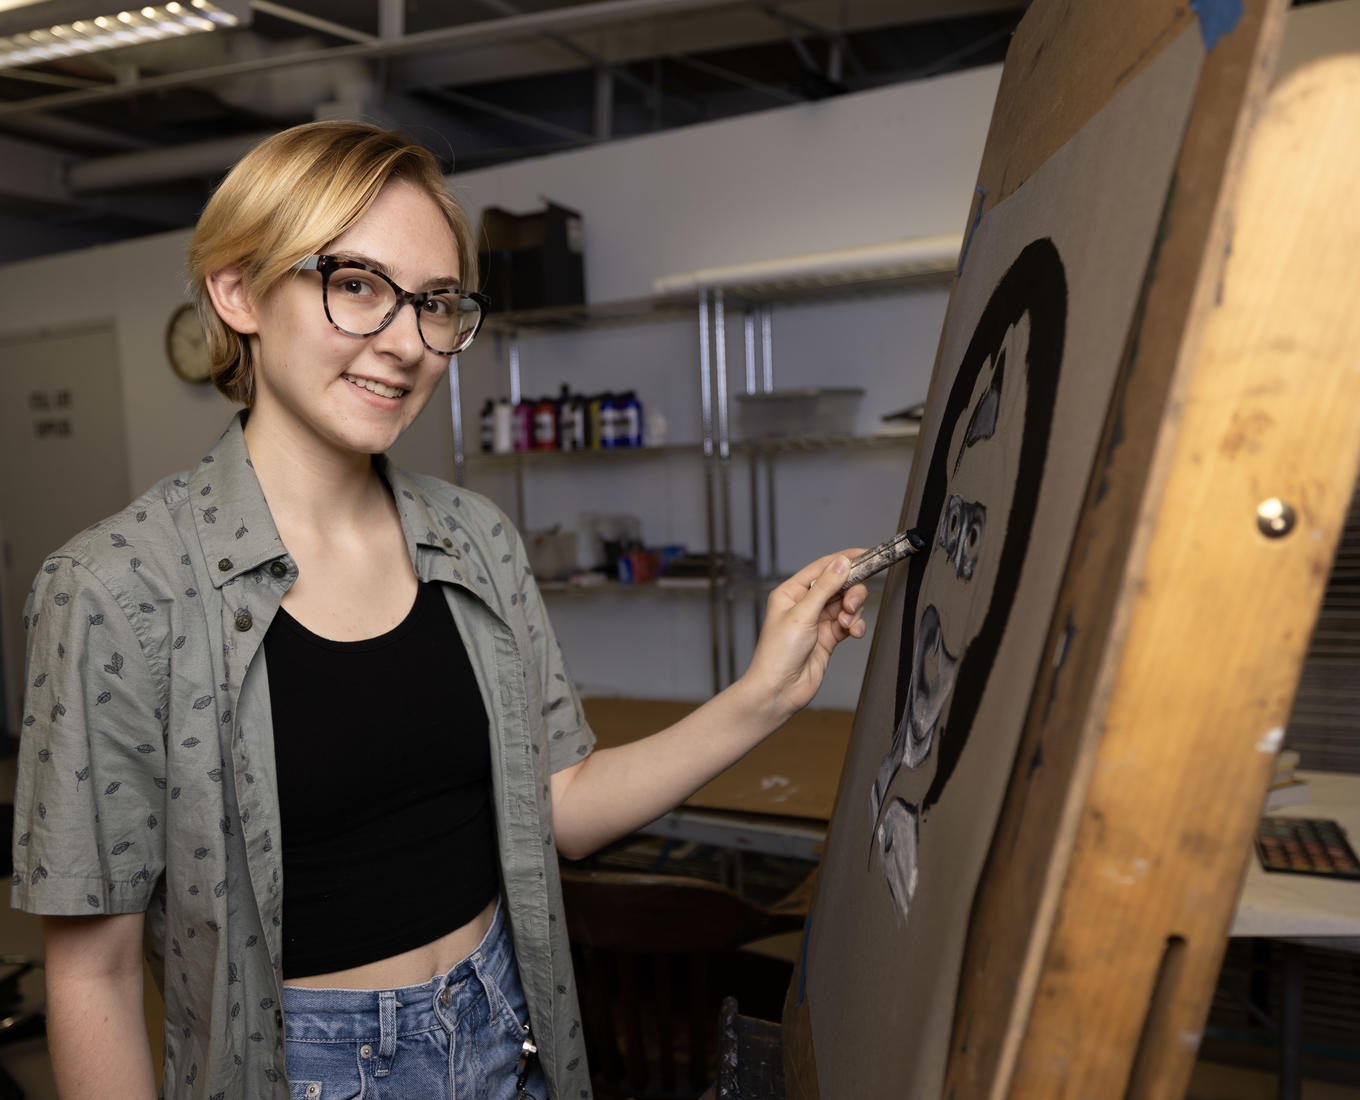 Young artist poses in front of drawing easel.